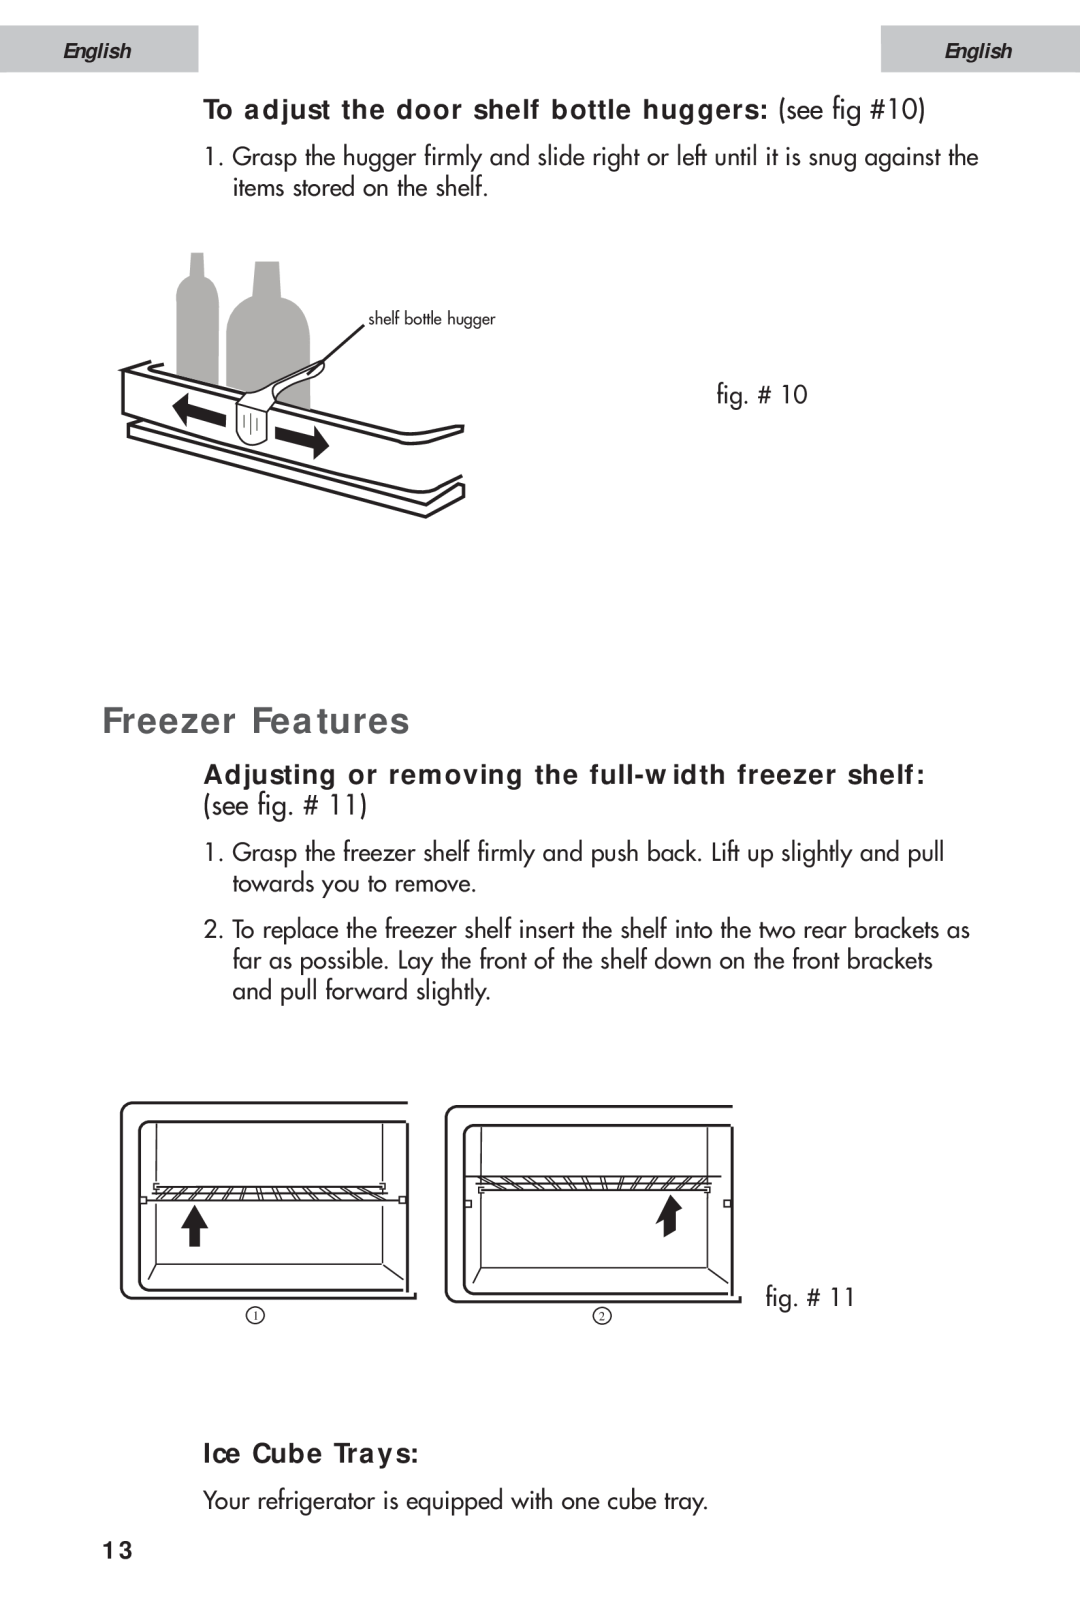 Haier HDE10WNA, HDE11WNA Freezer Features, To adjust the door shelf bottle huggers see fig #10, Ice Cube Trays, English 